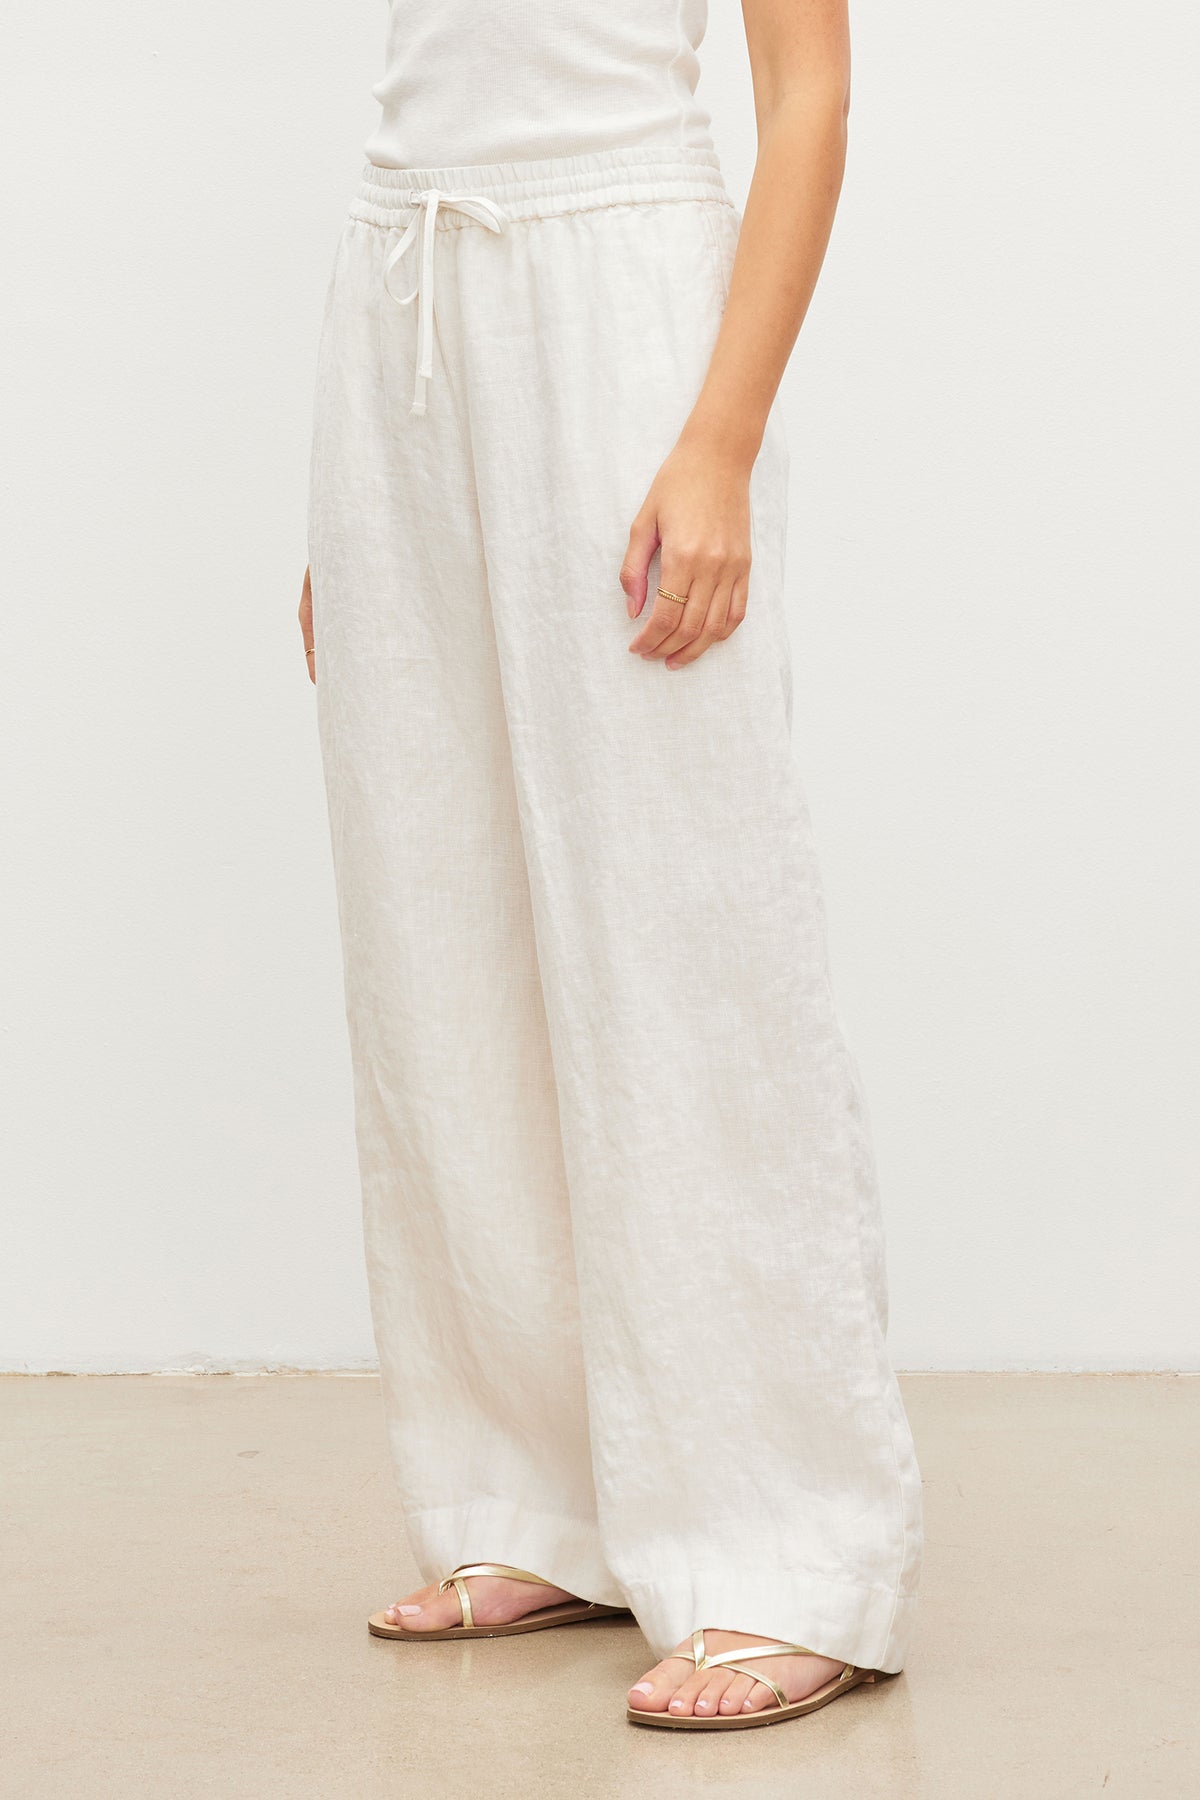 A woman wearing Gwyneth heavy linen pants by Velvet by Graham & Spencer with a relaxed drape and a white t-shirt.-36026021839041